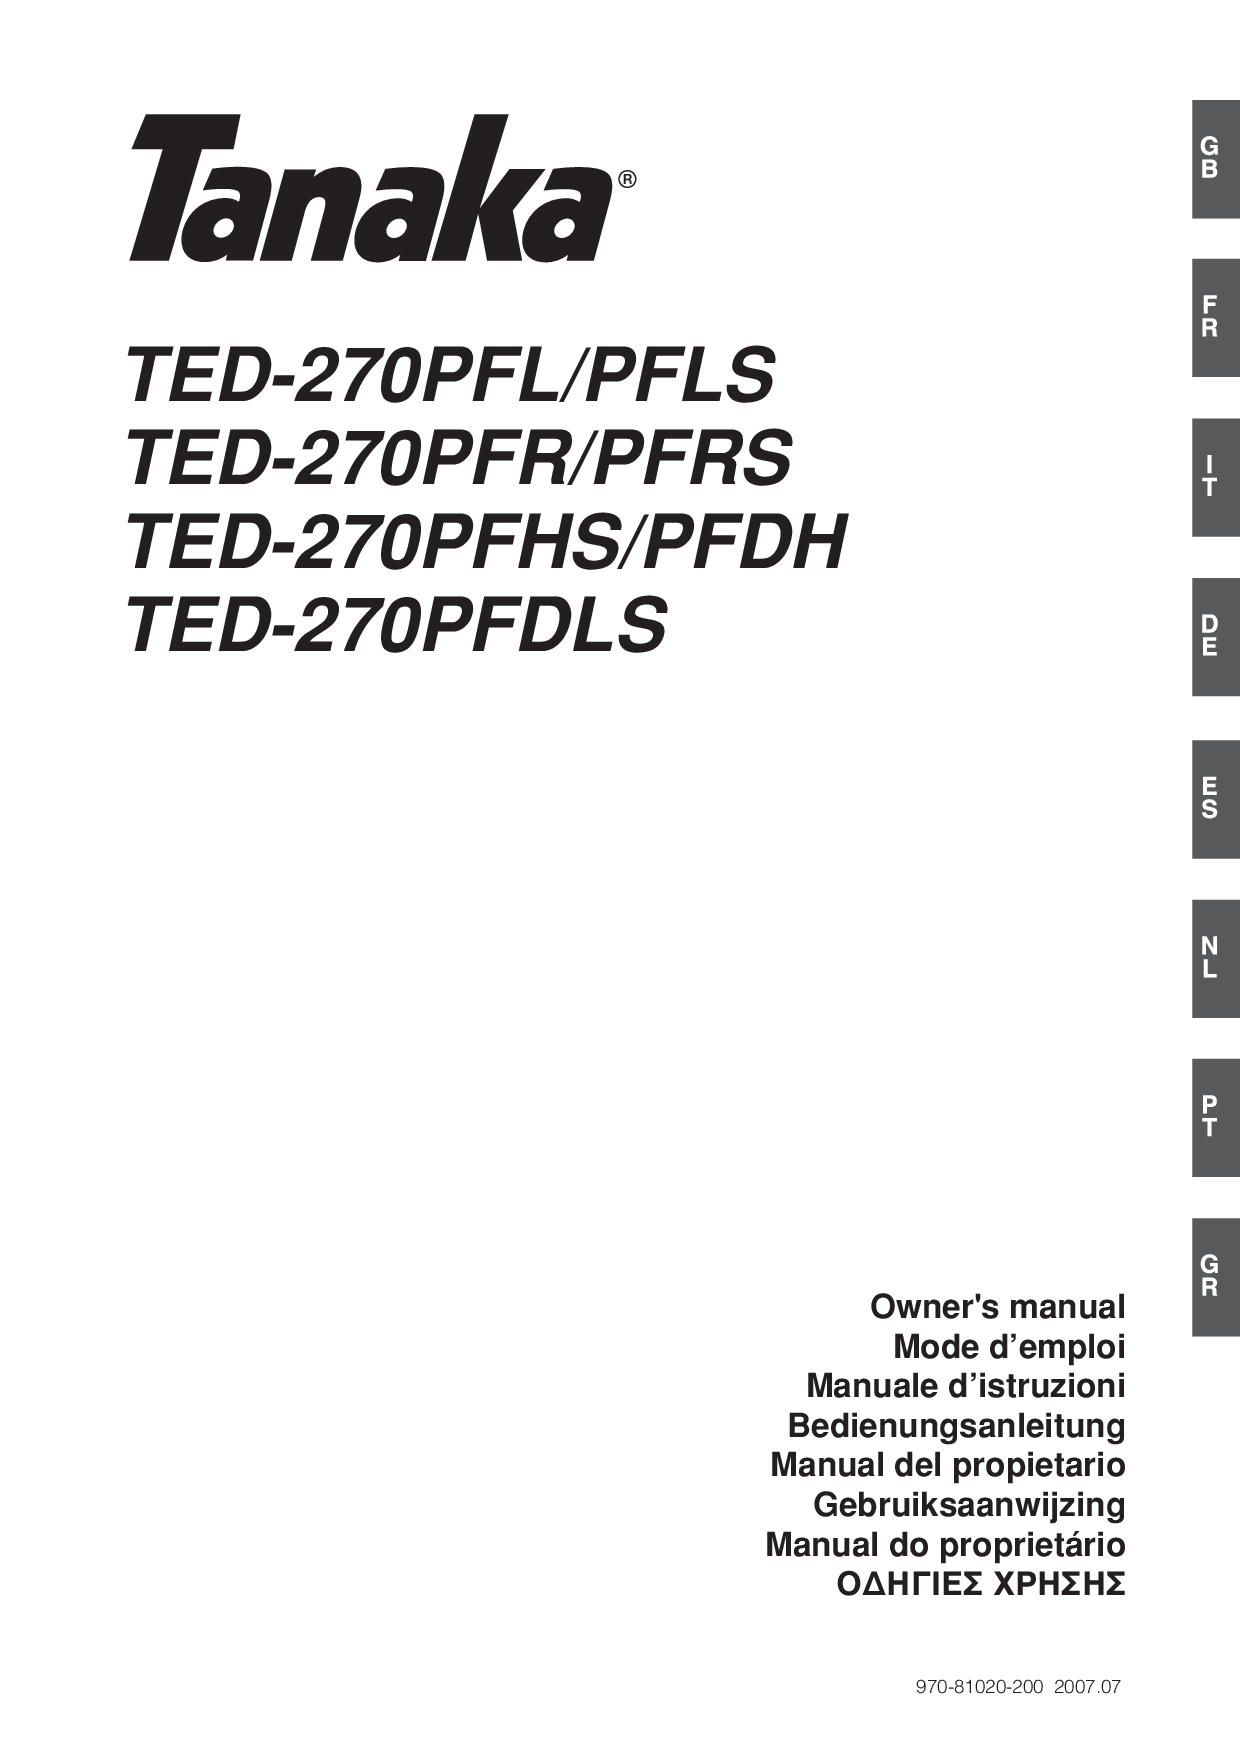 Tanaka TED-270PFL, TED-270PFDLS, TED-270PFR, TED-270PFLS, TED-270PFRS User Manual